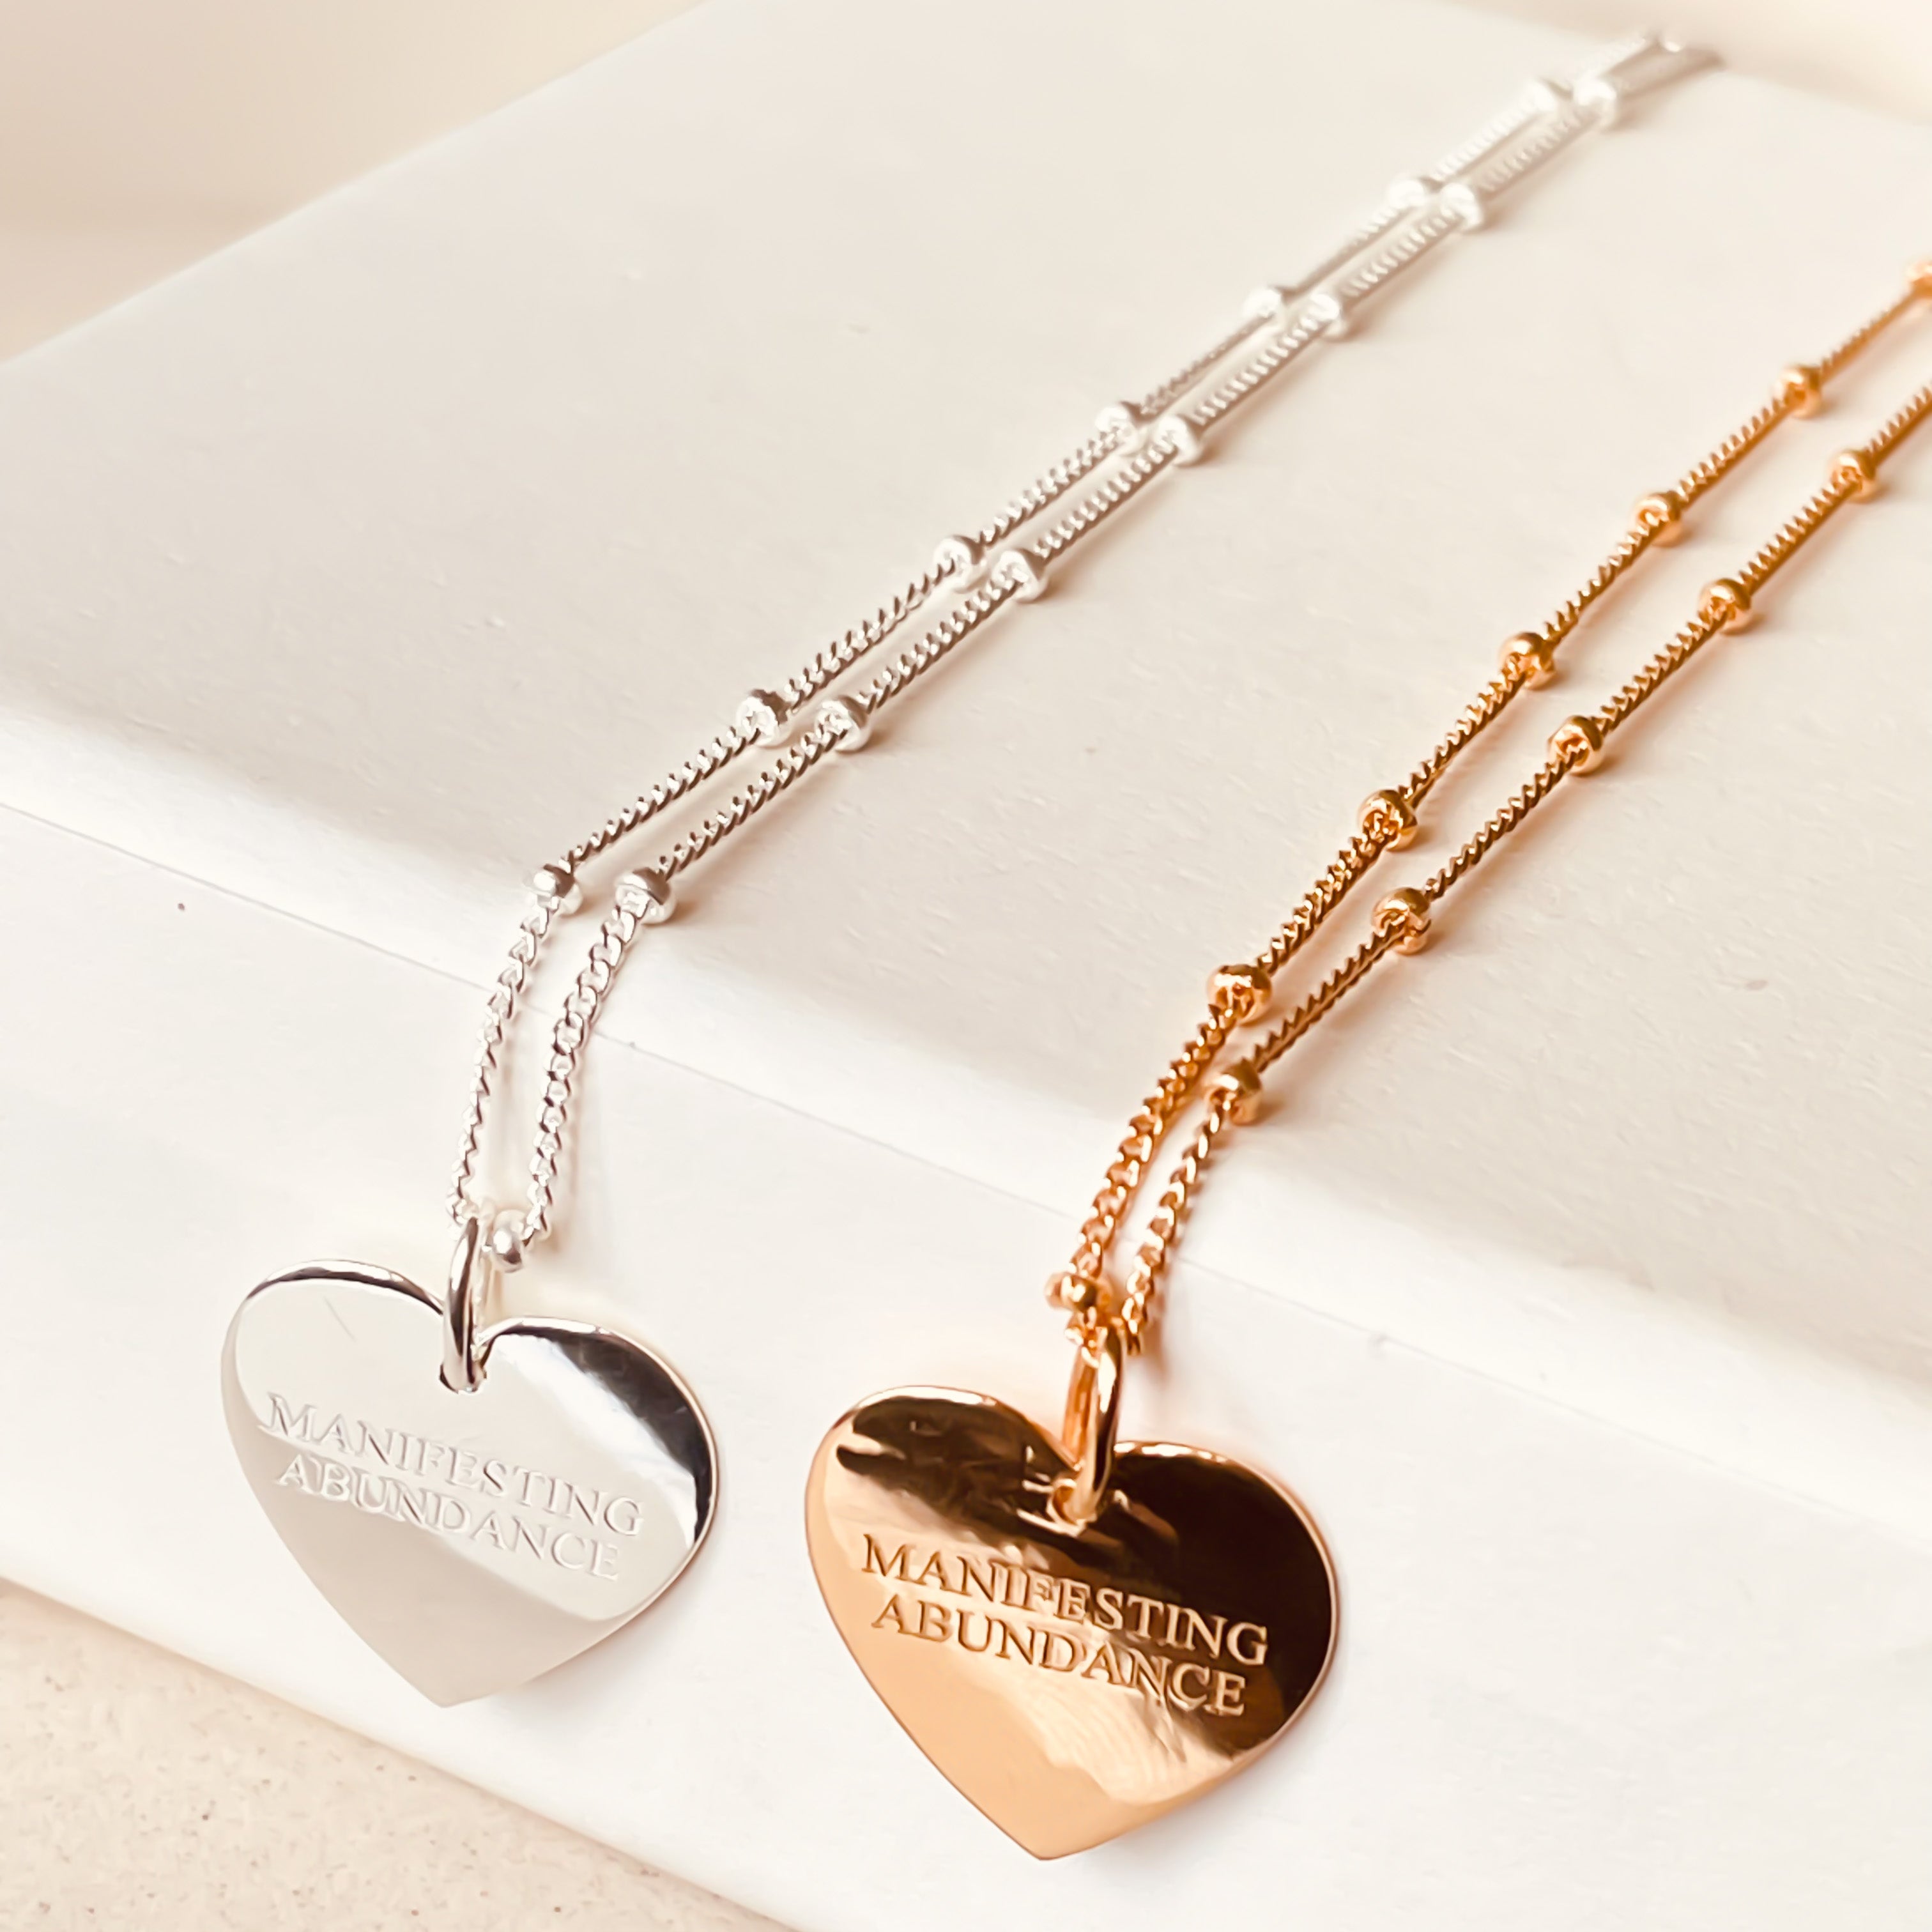 Personalised Self-Love and Affirmation Necklace - Octonov 